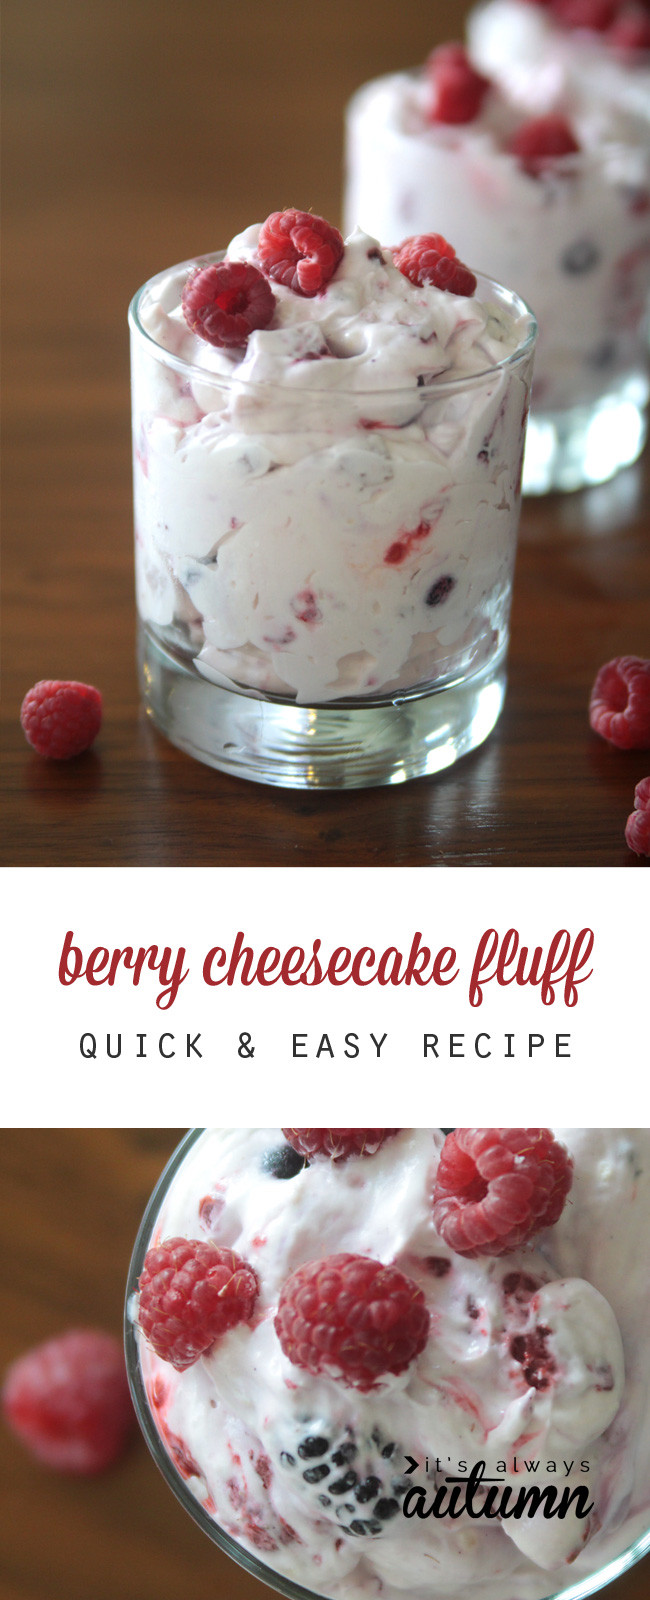 Quick And Easy Christmas Desserts
 berry cheesecake fluff a lighter holiday dessert It s